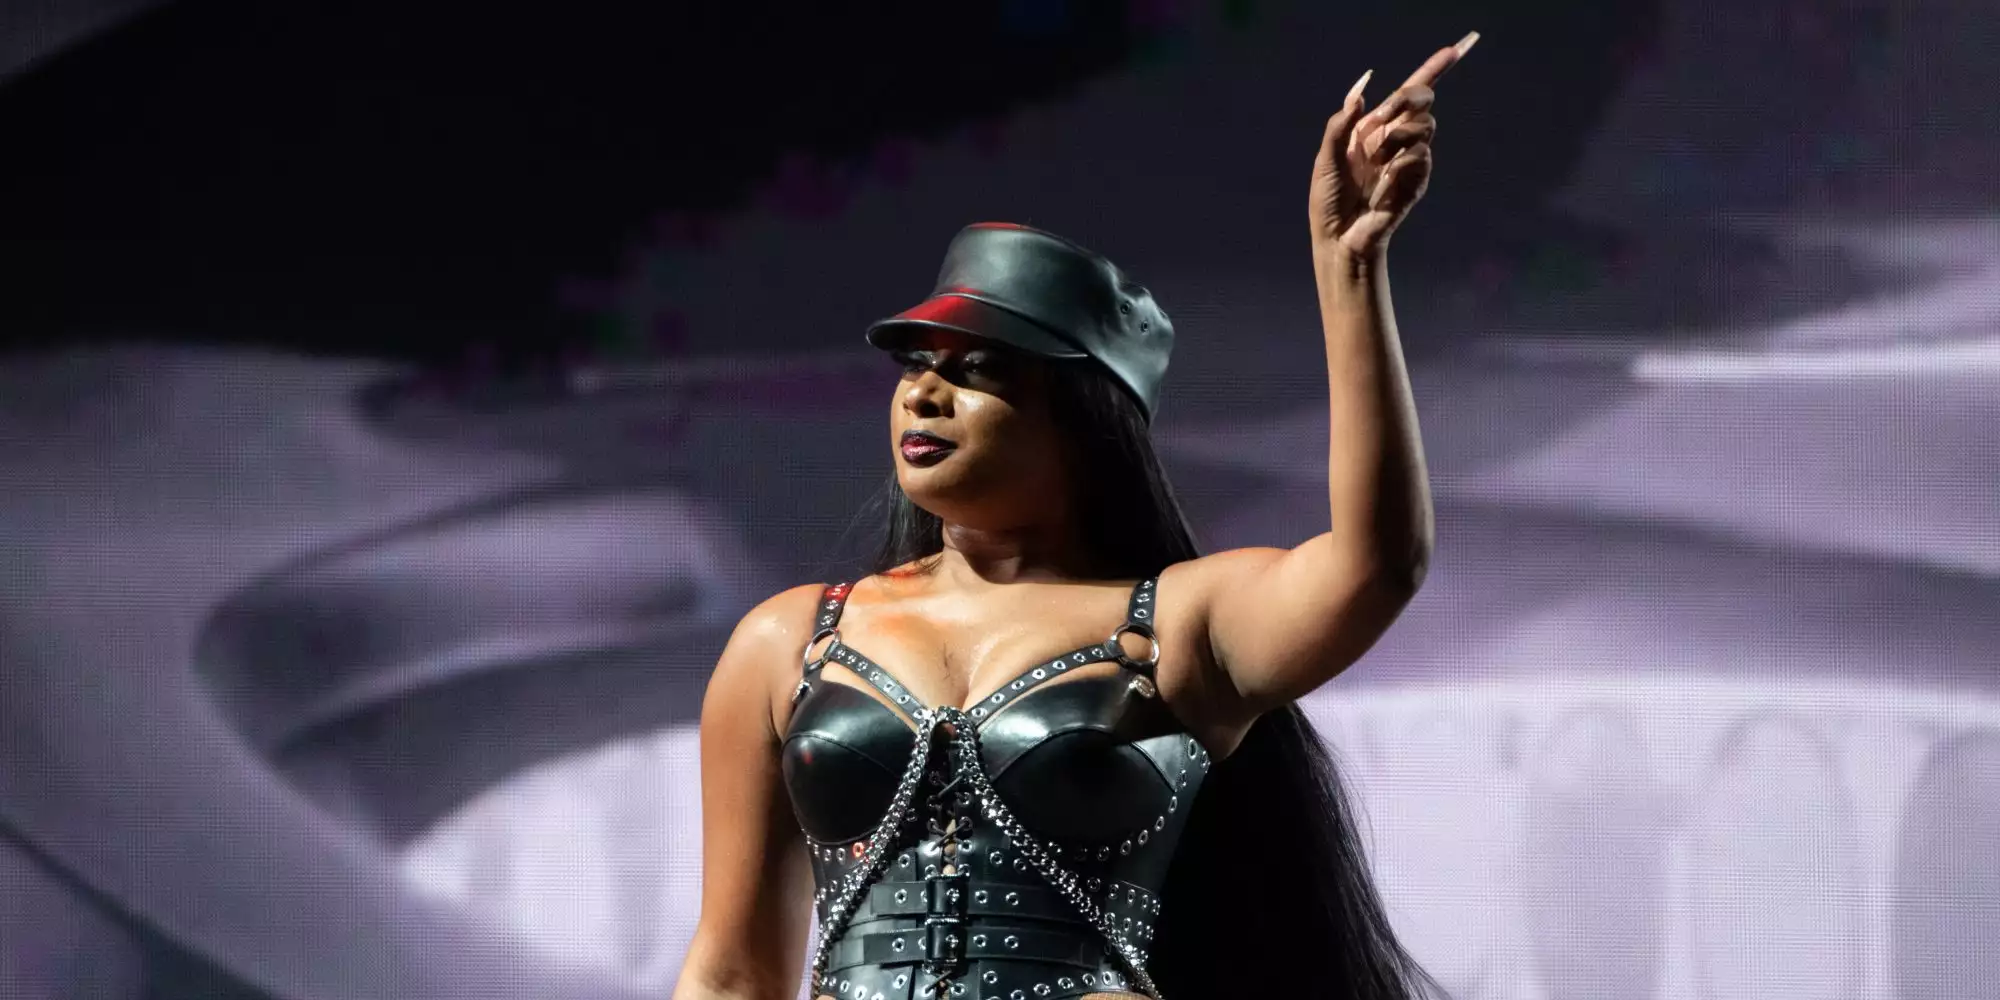 Megan Thee Stallion Calls Out SCOTUS, Texas' Abortion Laws During Set: 'Really Embarrassing Me'